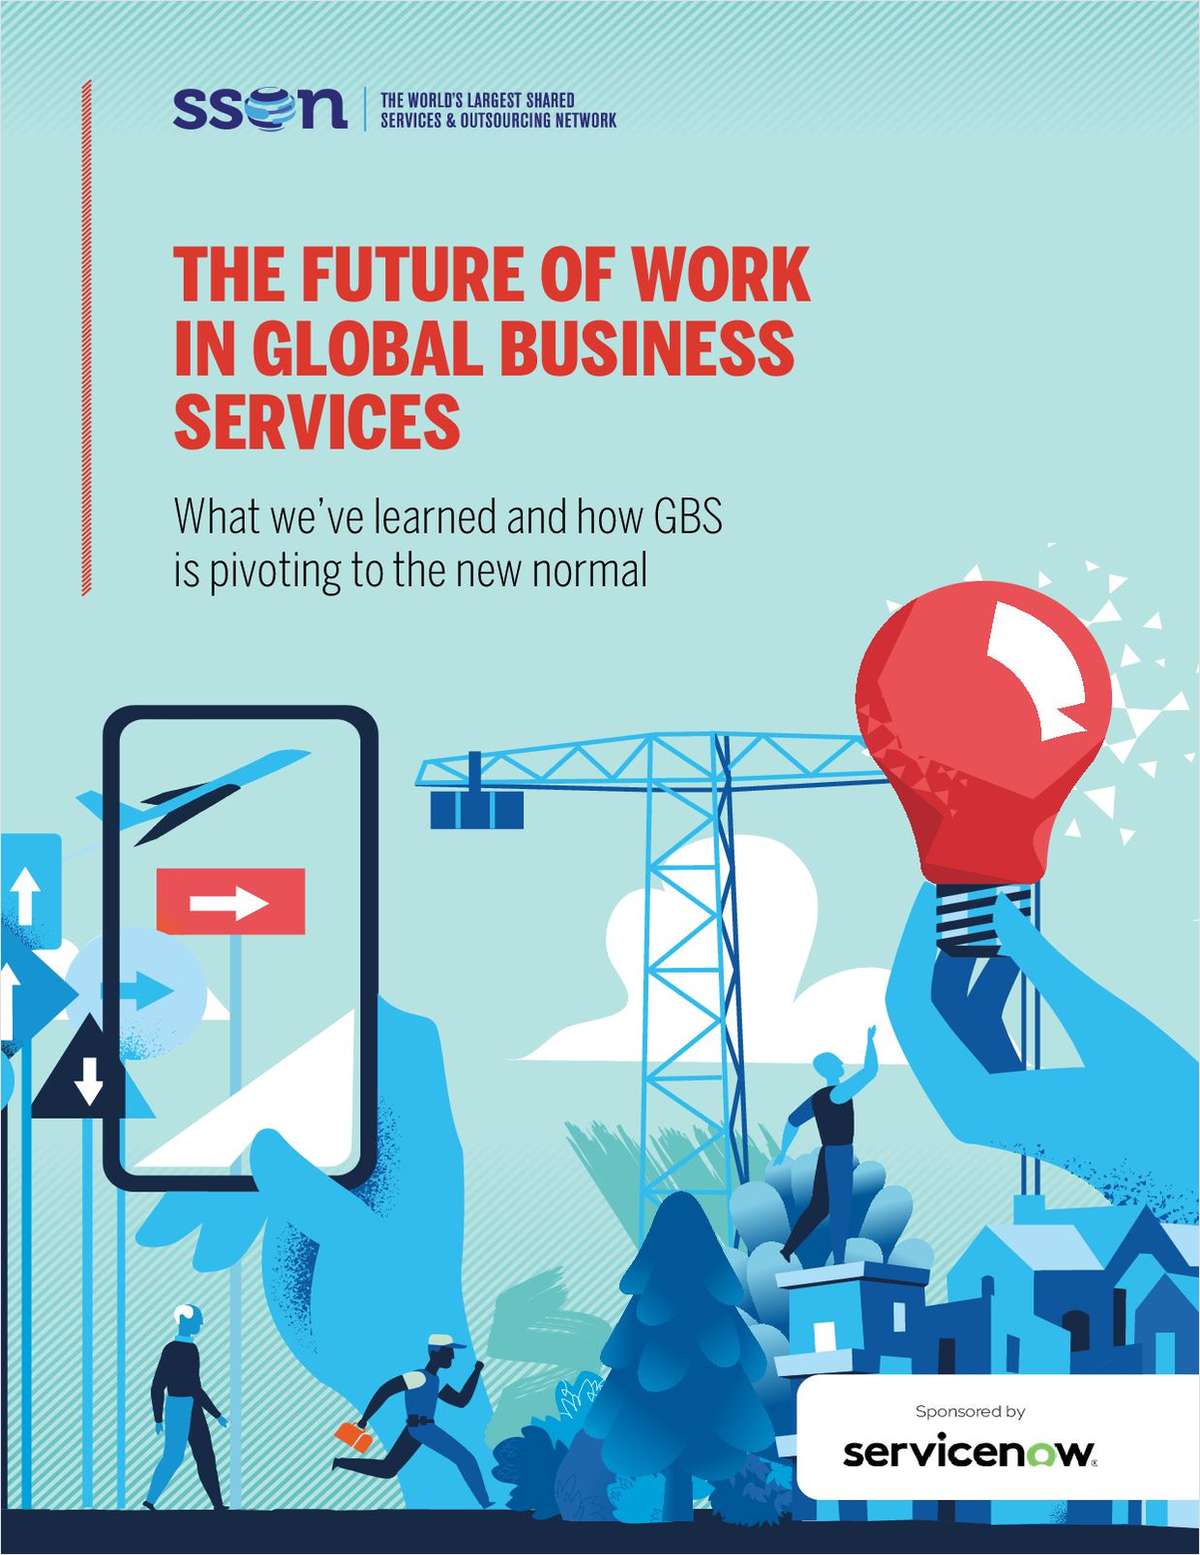 The Future of Work in Global Business Services